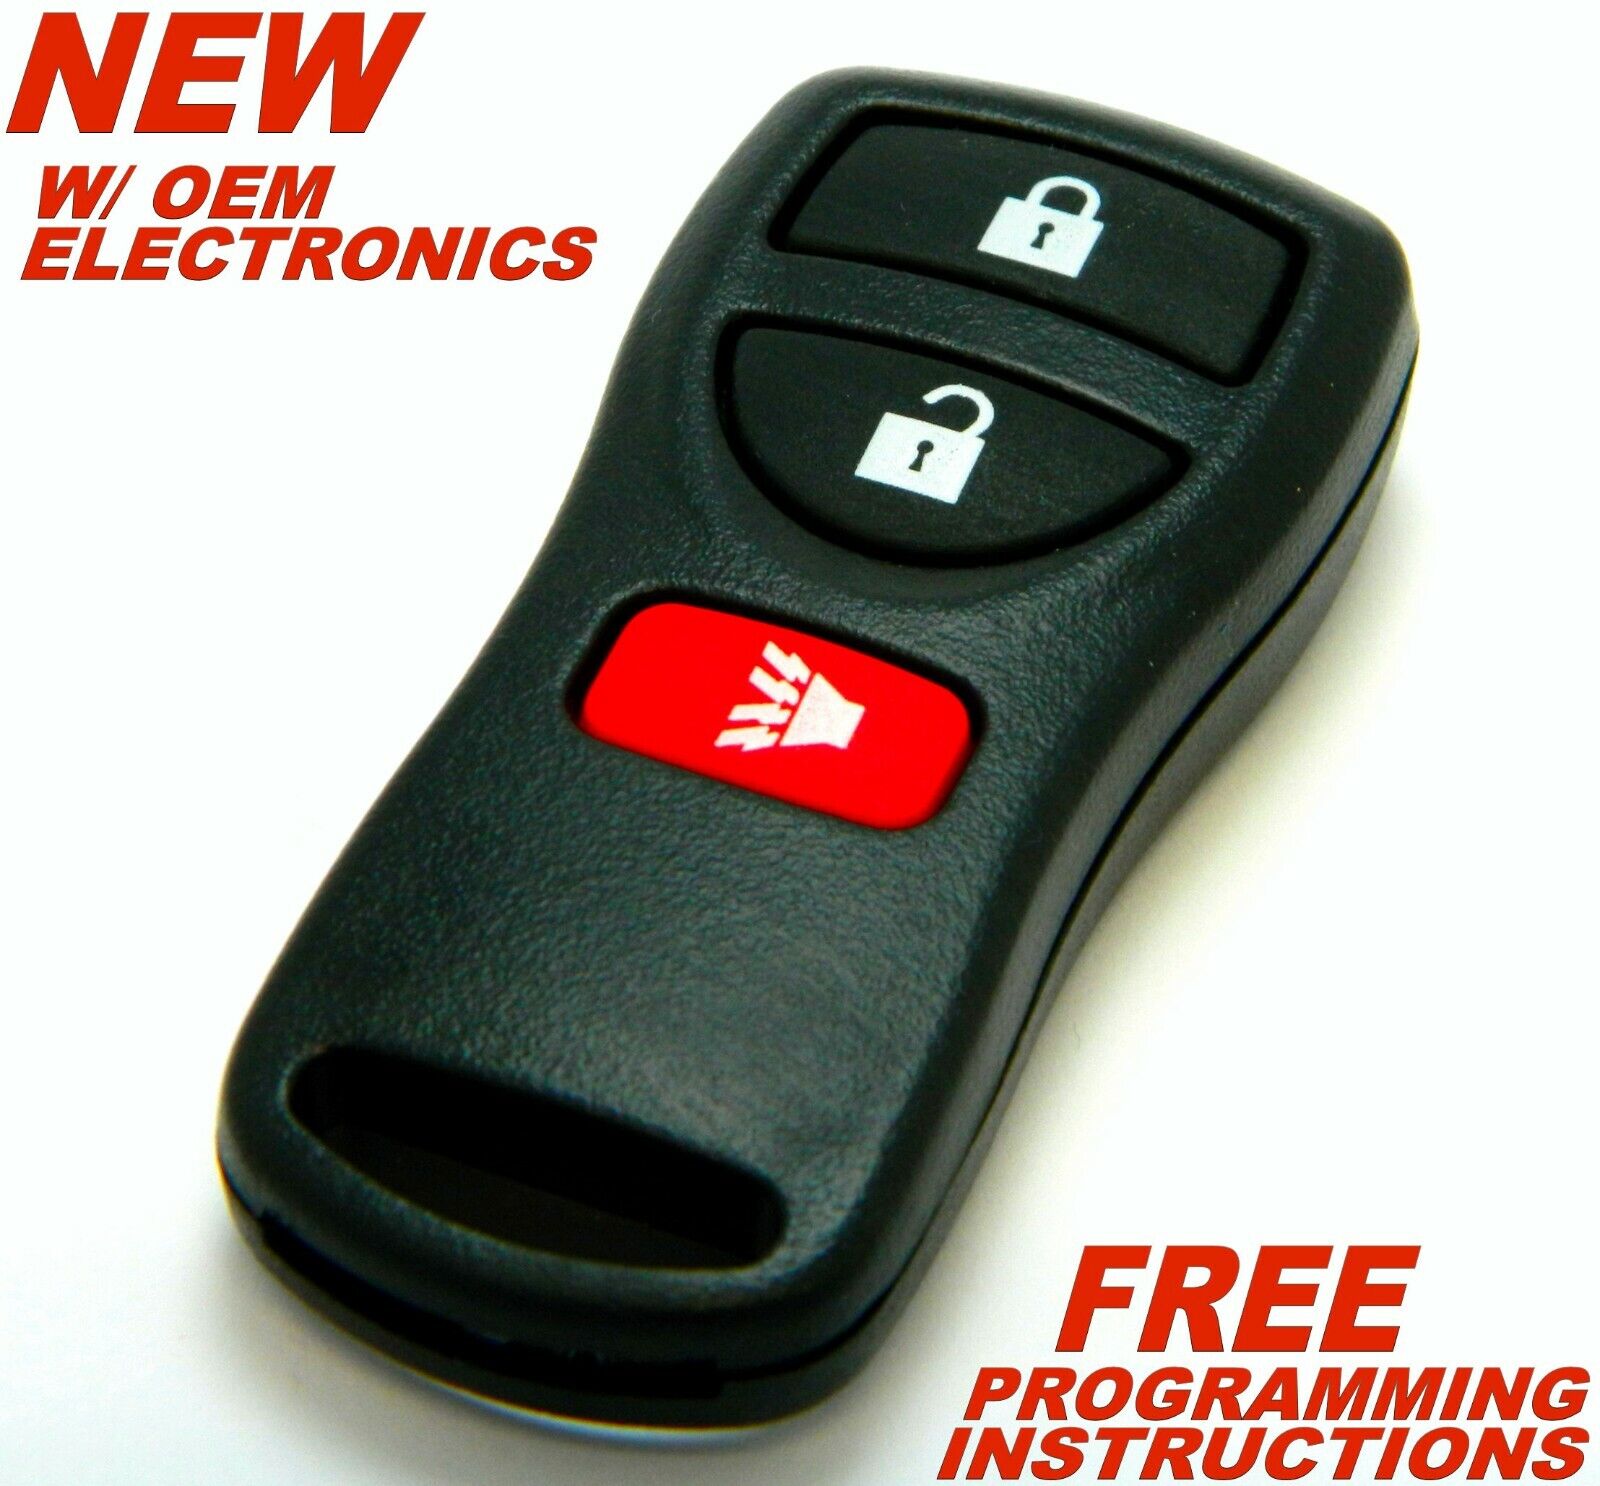 OEM ELECTRONIC 3 BUTTON REMOTE KEY FOB FOR 2005-2020 NISSAN FRONTIER